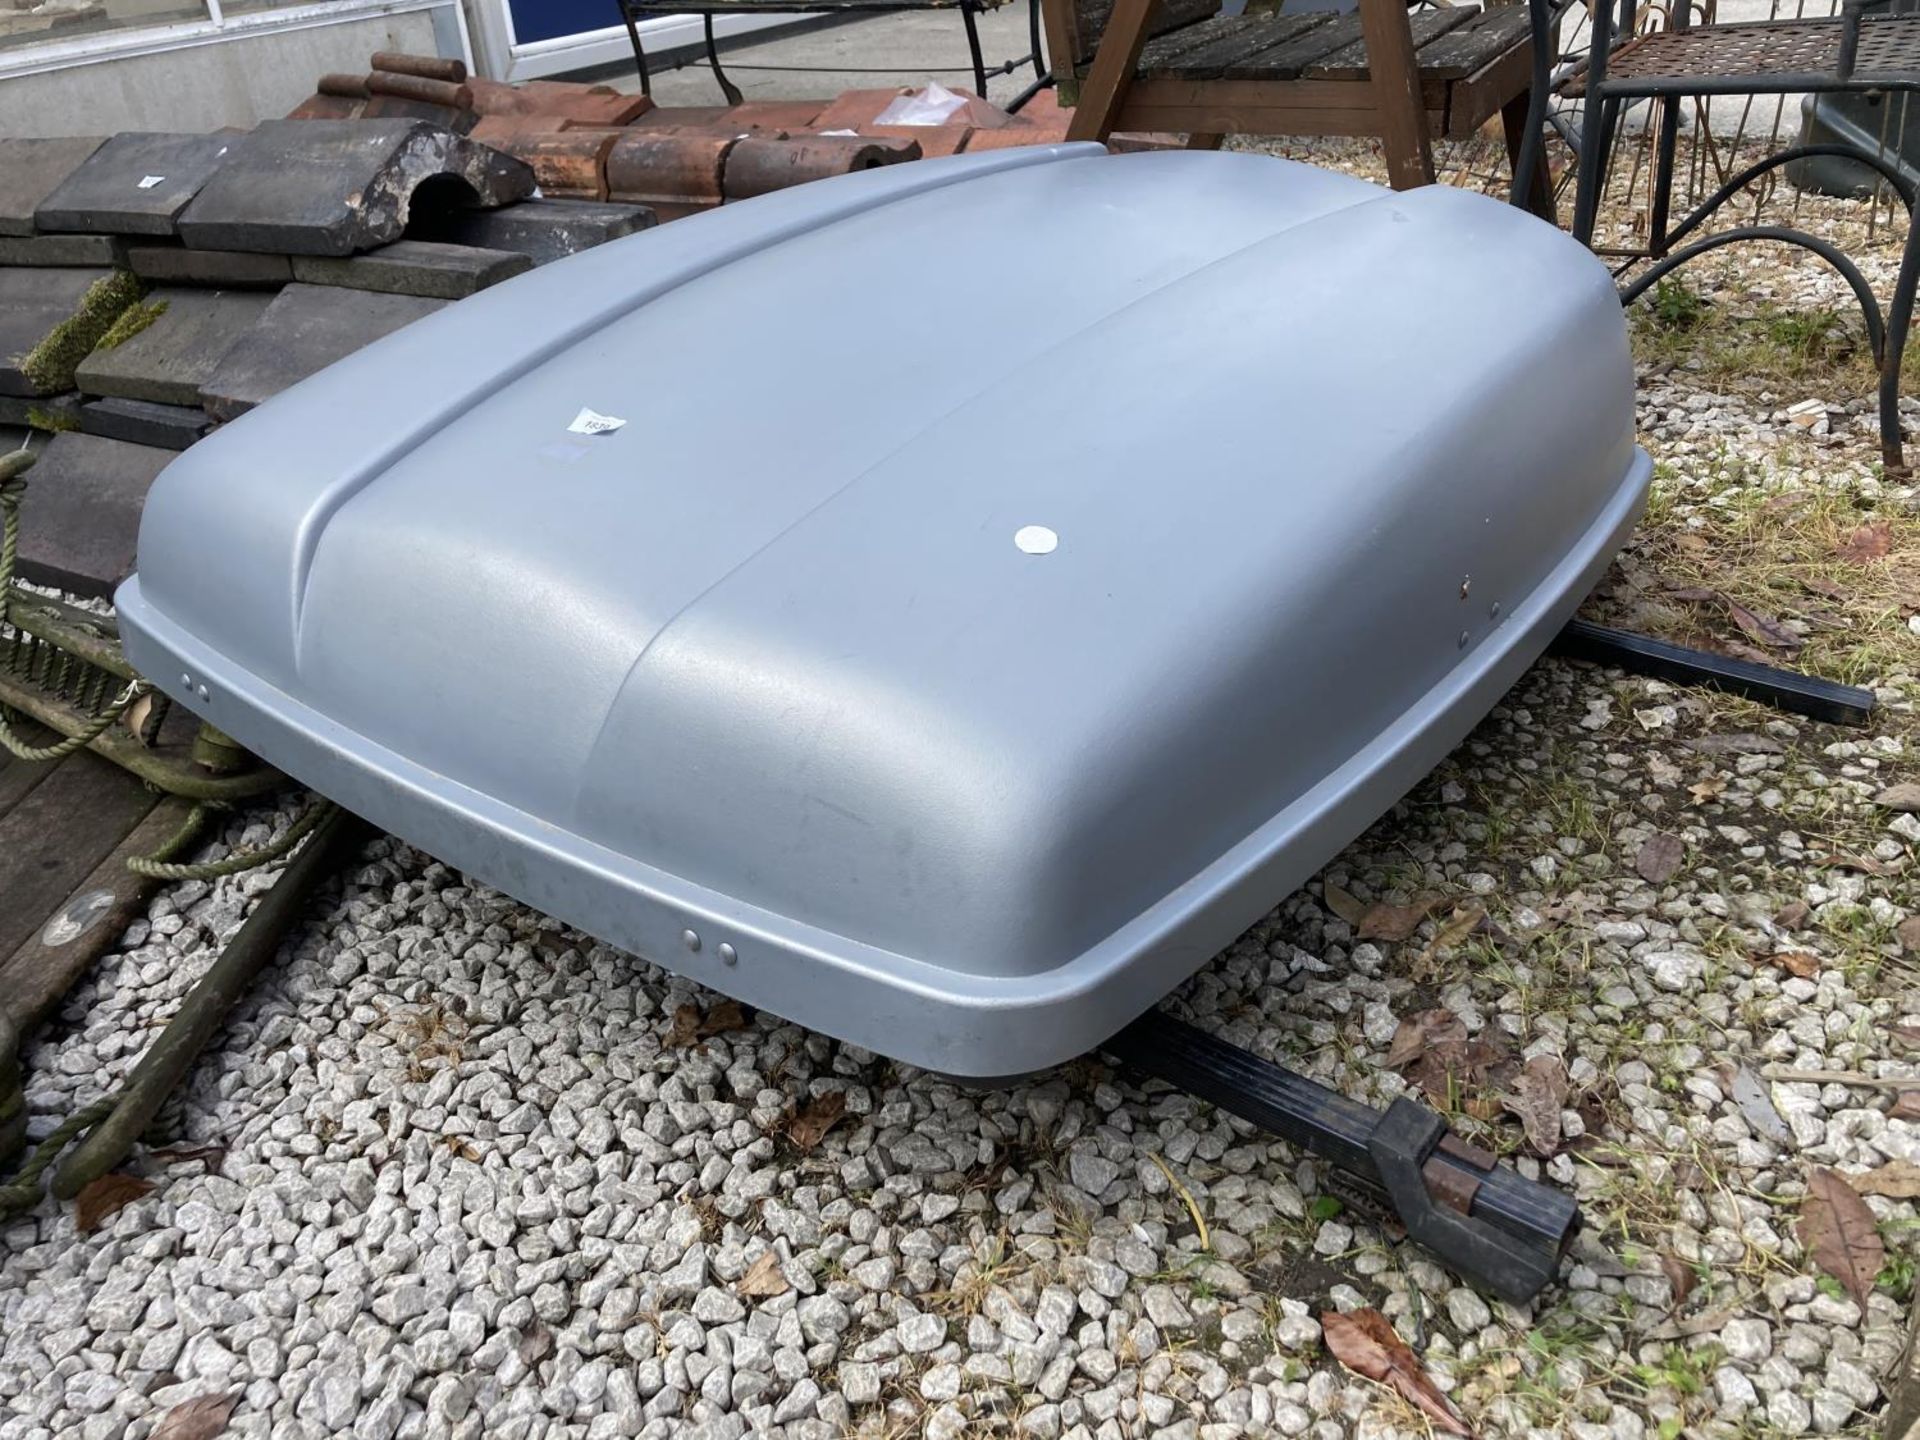 A CAR ROOF BOX WITH ROOF BARS